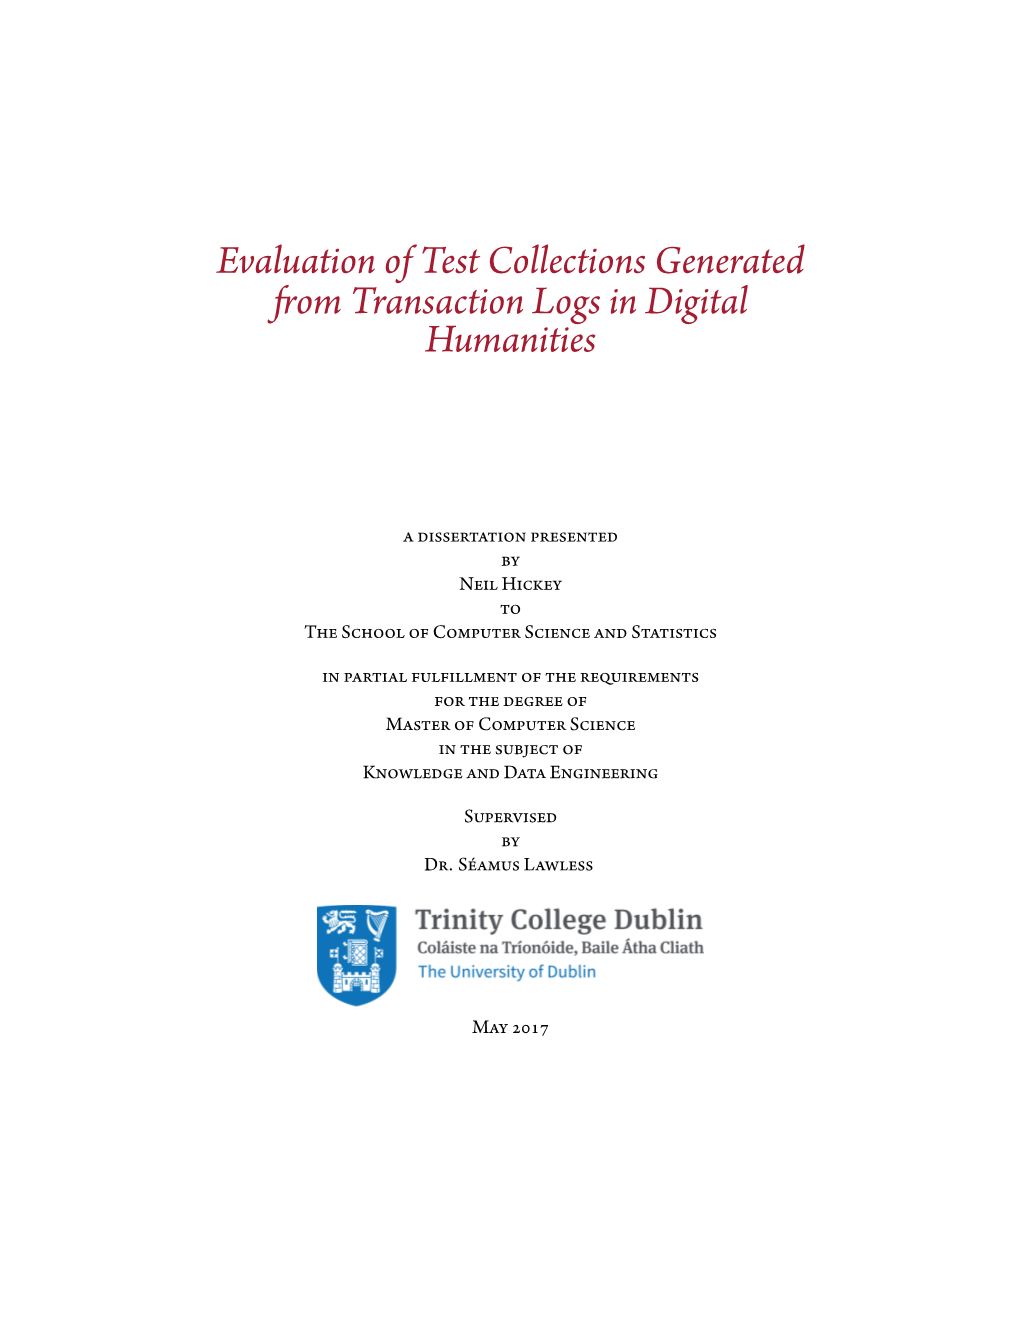 Evaluation of Test Collections Generated from Transaction Logs in Digital Humanities